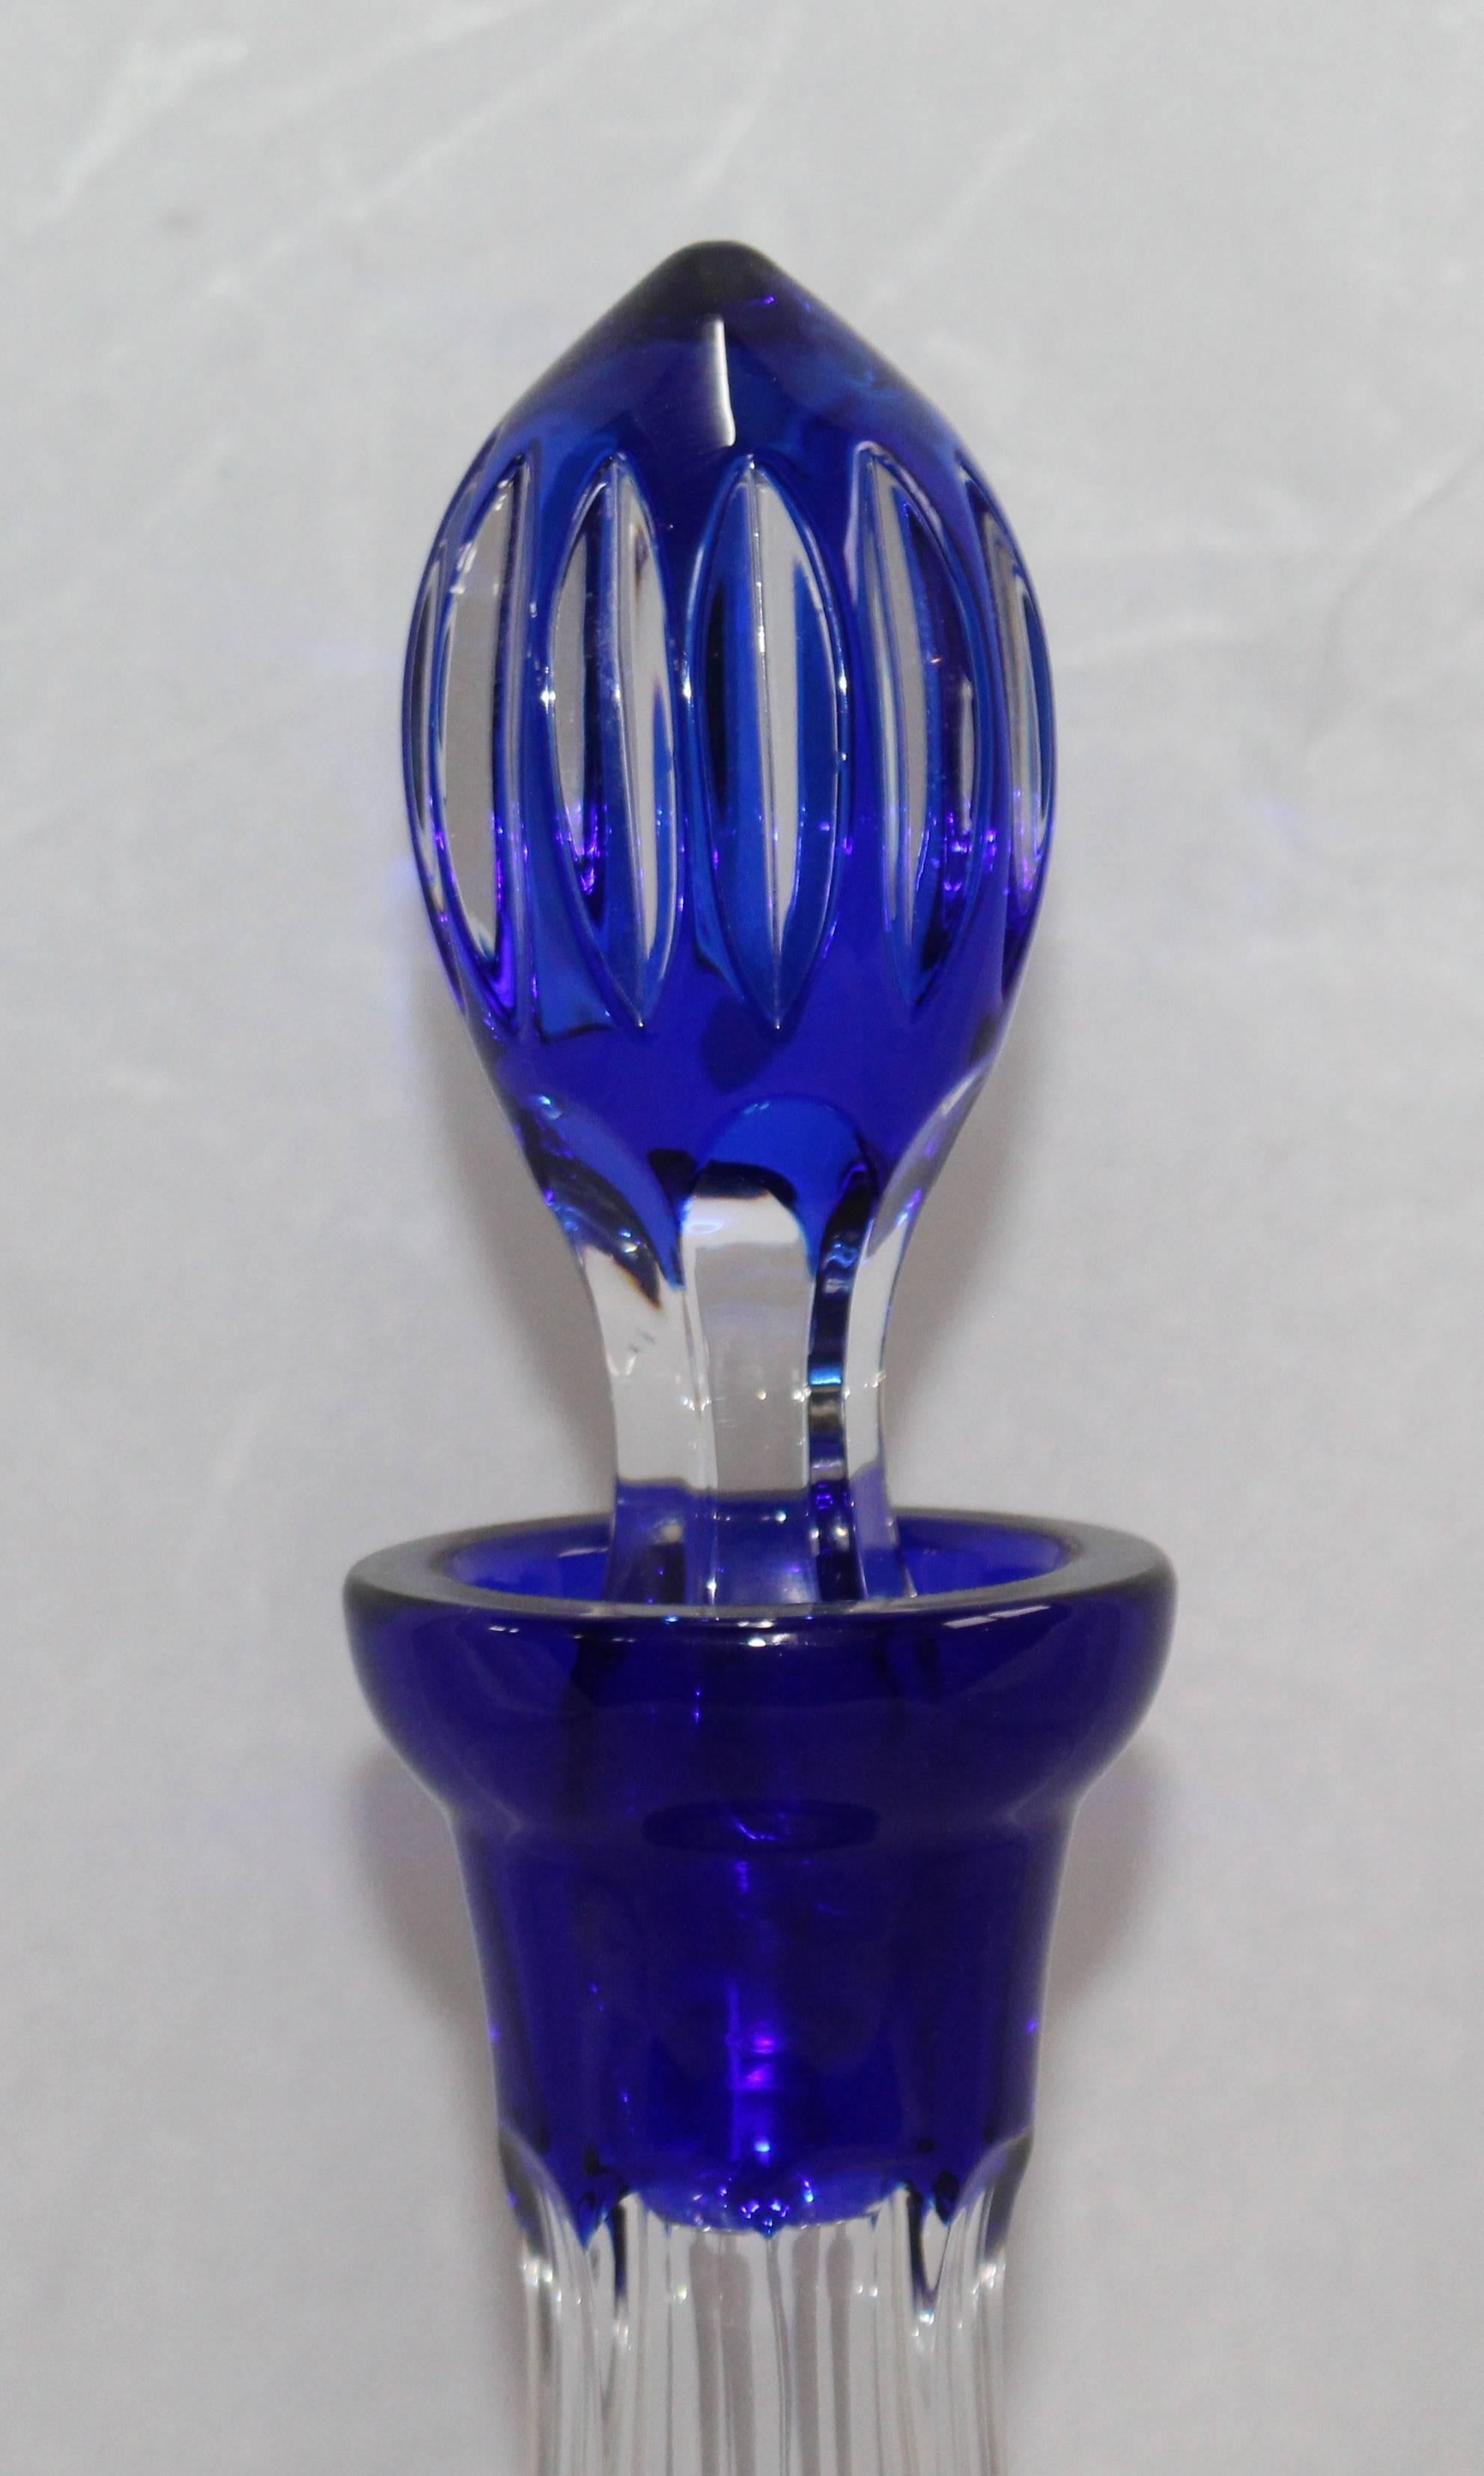 Origin mid-late 20th century, German
Composition blue overlay cut glass
Measures: Width 14 cm / 5 1/2 in
Height 39.5 cm / 15 1/2 in
Condition: Very good condition. No chips, cracks or repairs.




Quality heavy cut glass blue overlay